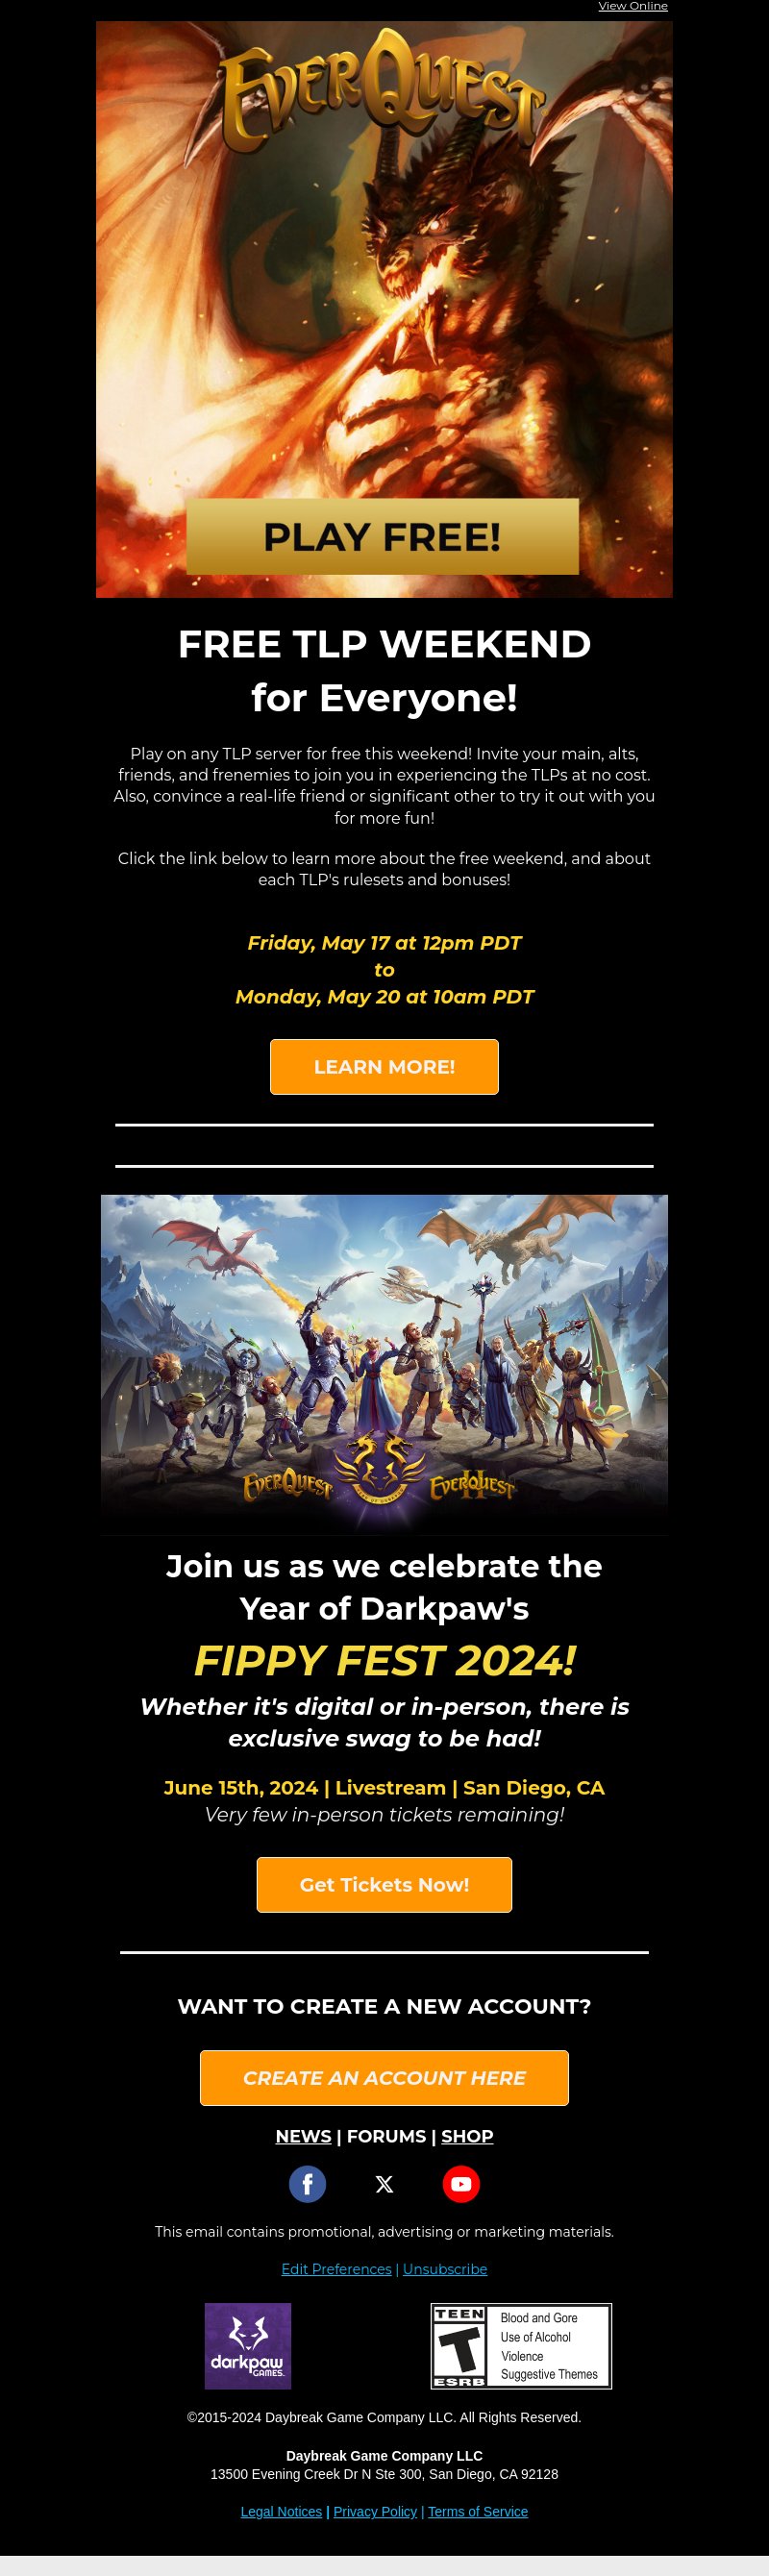 email.daybreakgames.com